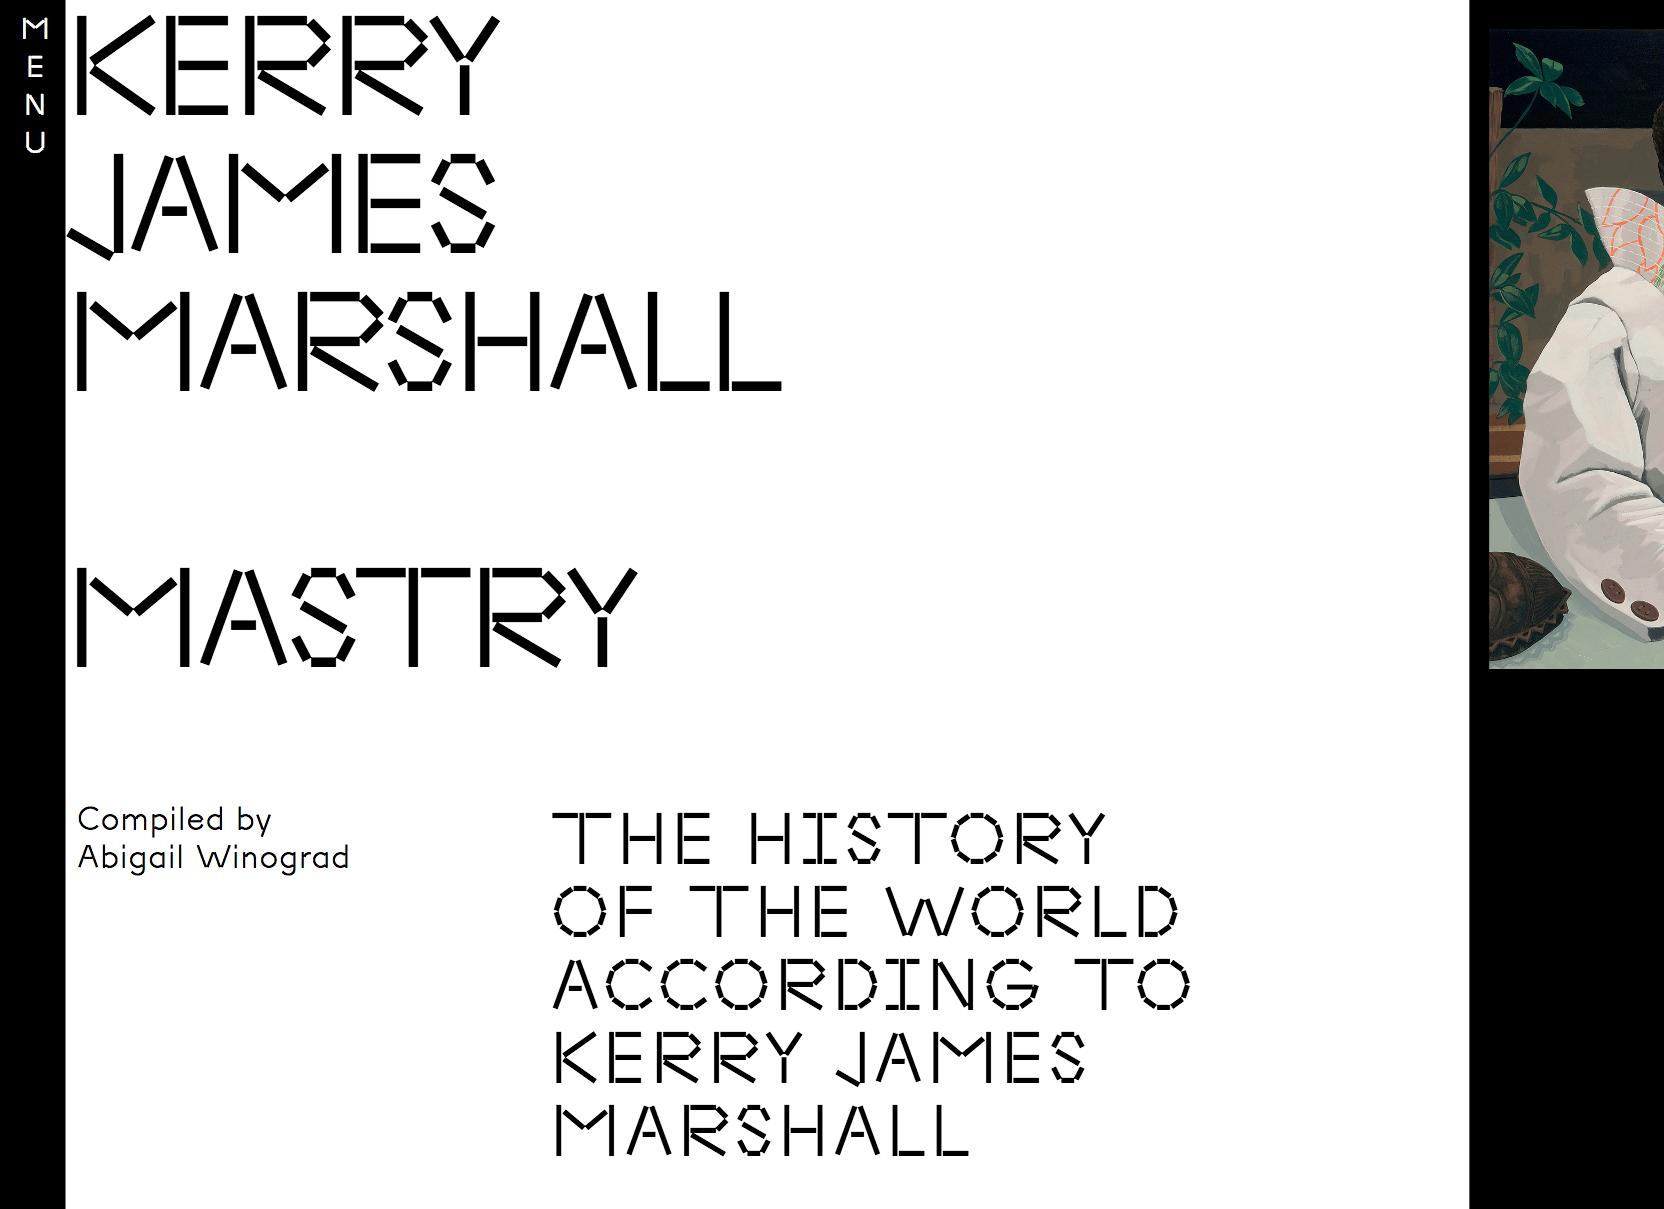 A Screenshot of the website reads the exhibition title, Kerry James Marshall: Mastry, in black text on a white background with part of an image to the right. We can also see a secondary header that reads "The History of the World According to Kerry James Marshall."